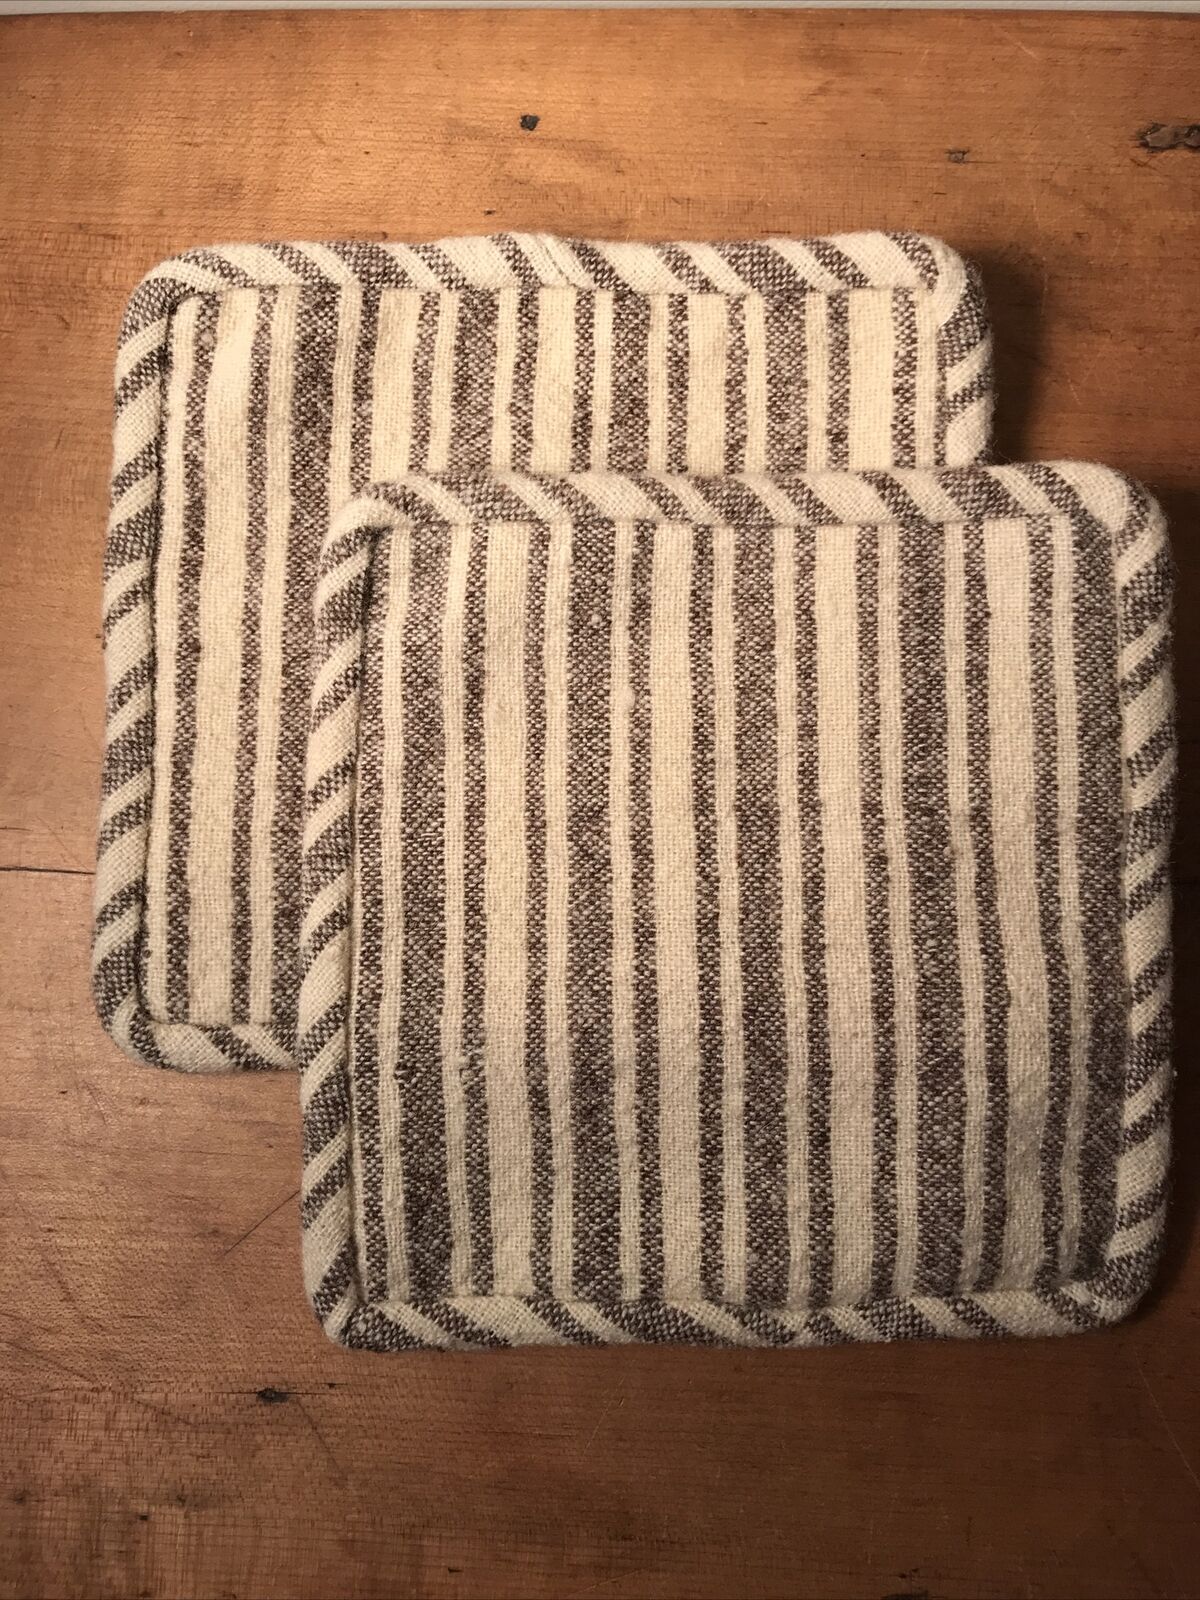 Primitive Early Linsey-Woolsey Striped Potholders (2)  7” Square Handmade Brown